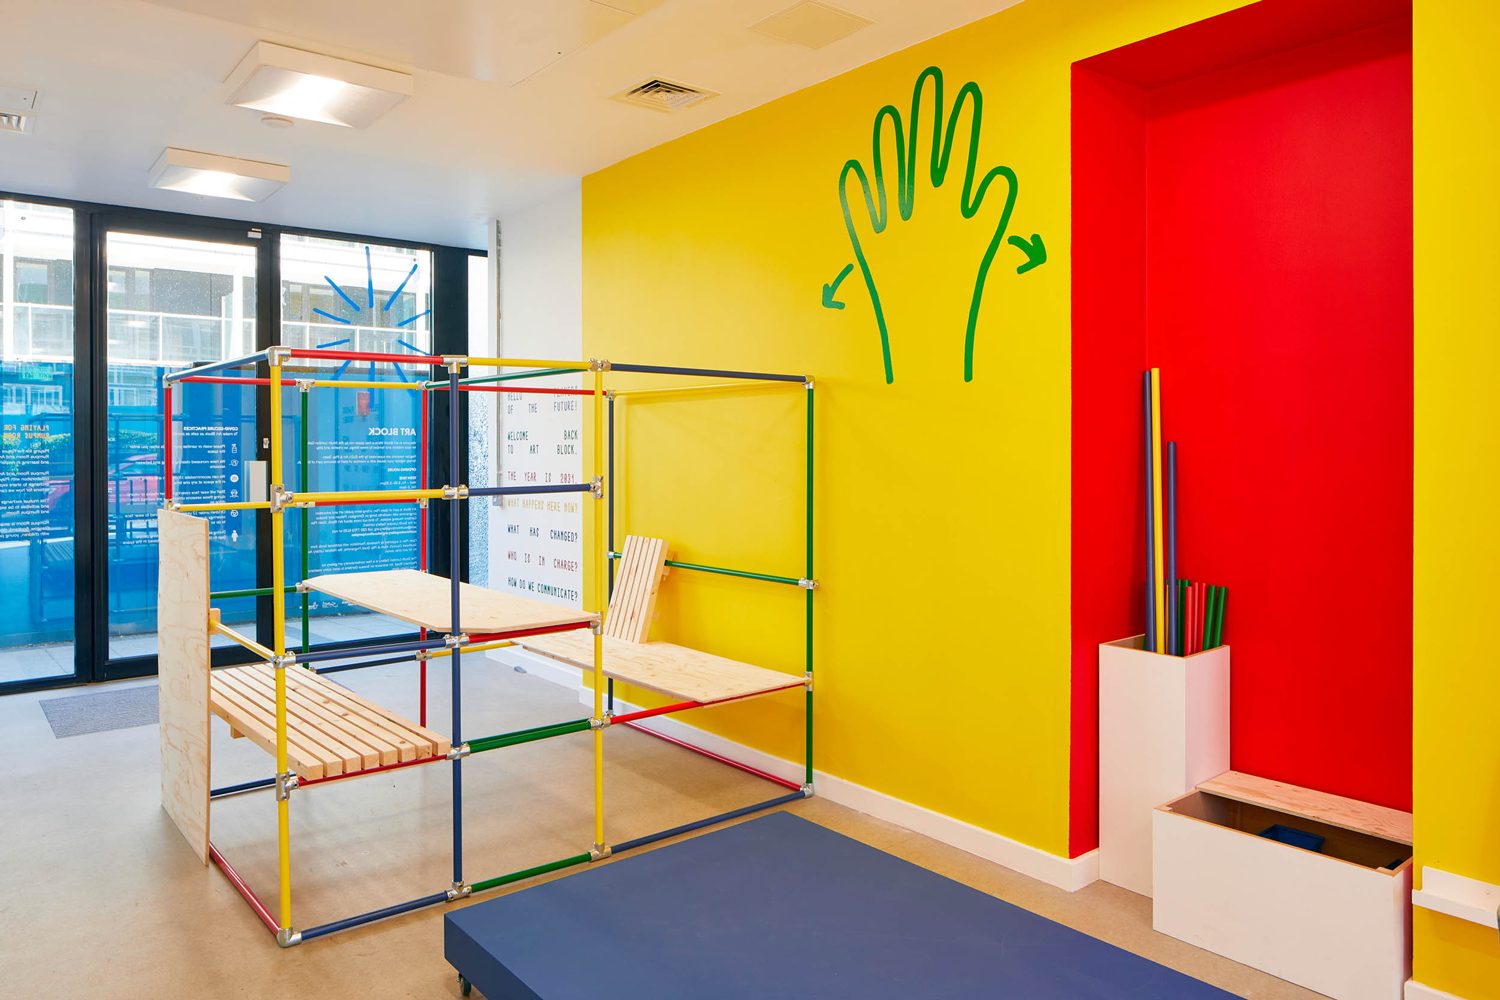 Art Block with a brightly coloured yellow wall, a brightly coloured wood modular structure and a green hand painted onto the wall